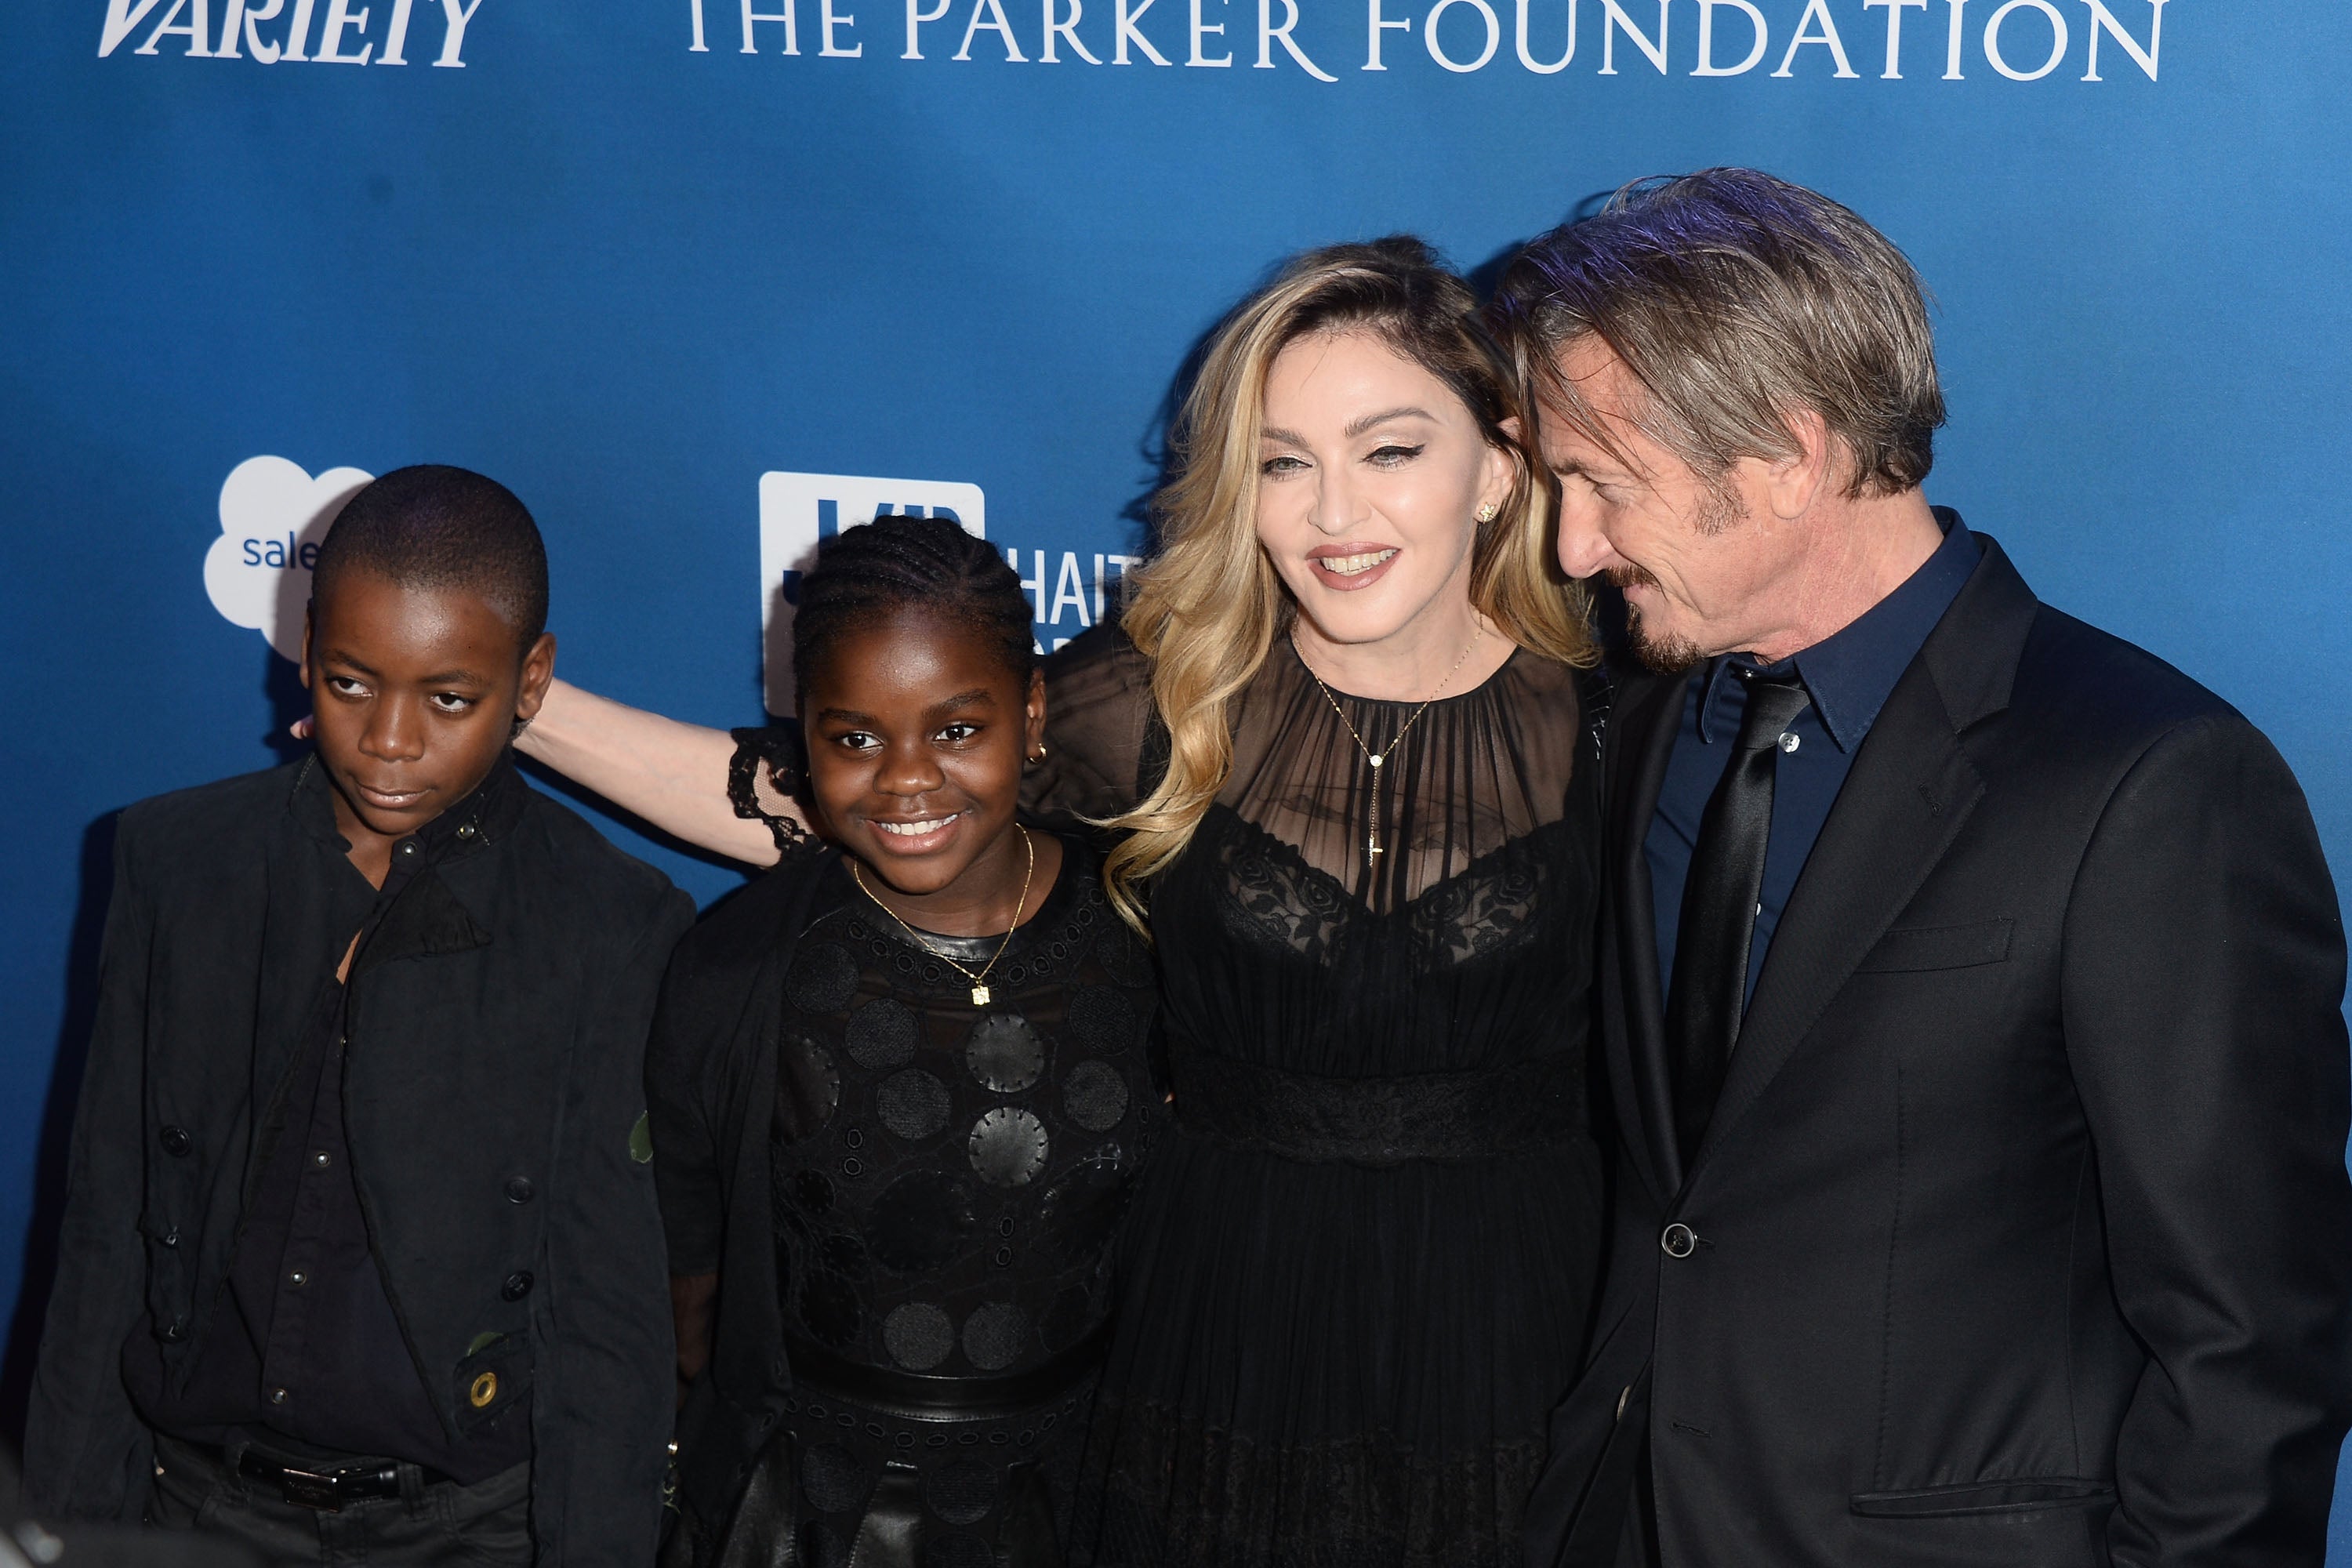 David Banda is one of Madonna’s six kids, four of whom she adopted